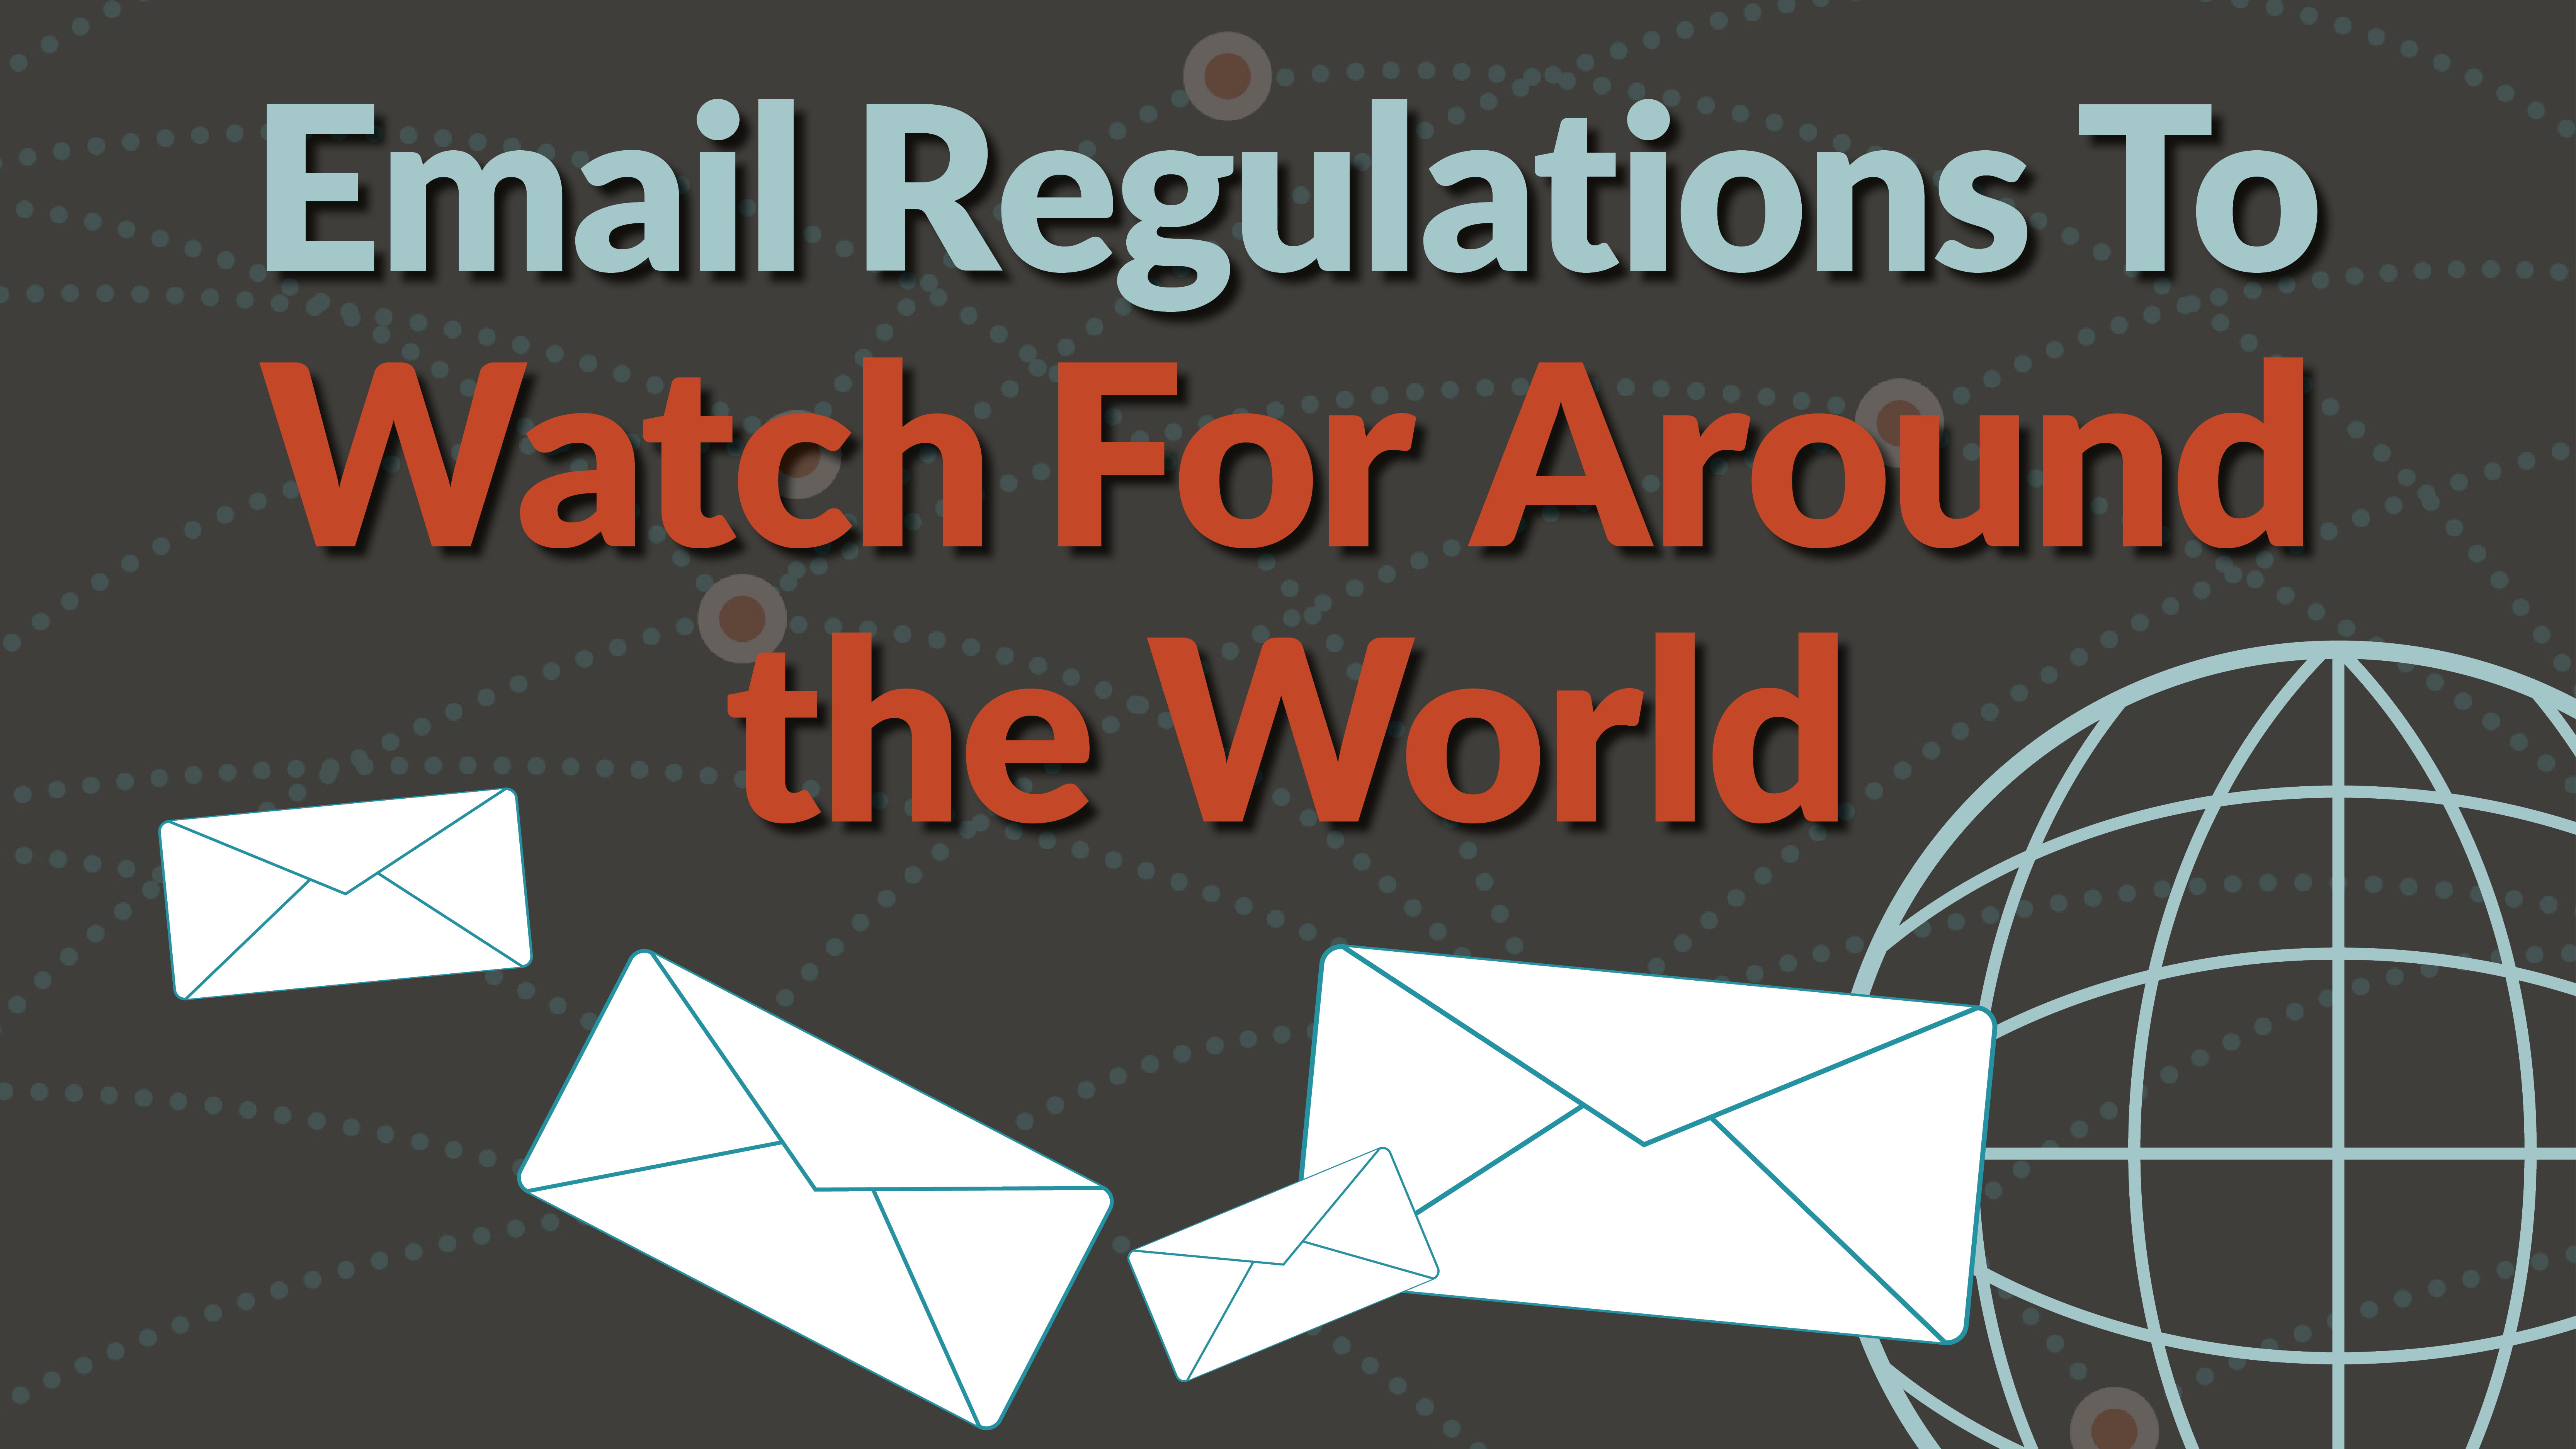 Spam-Free Emails: Understanding the Rules Around the Globe